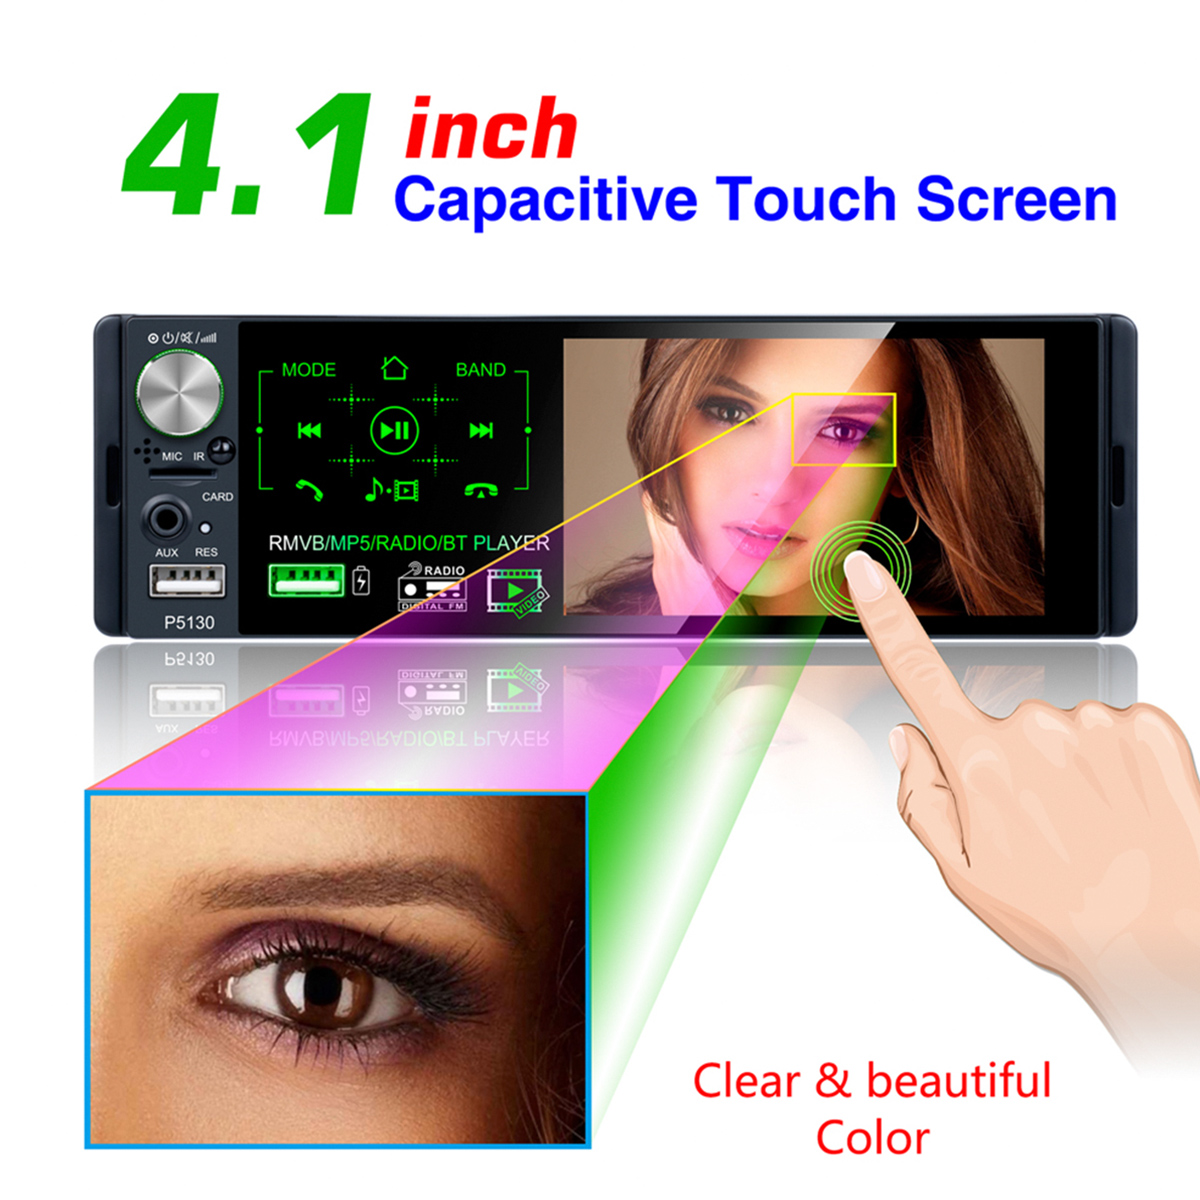 P5130-41-Inch-1-DIN-Car-Stereo-Radio-MP5-Player-Full-Touch-Screen-FM-AM-RDS-bluetooth-USB-Strong-Bas-1649564-2